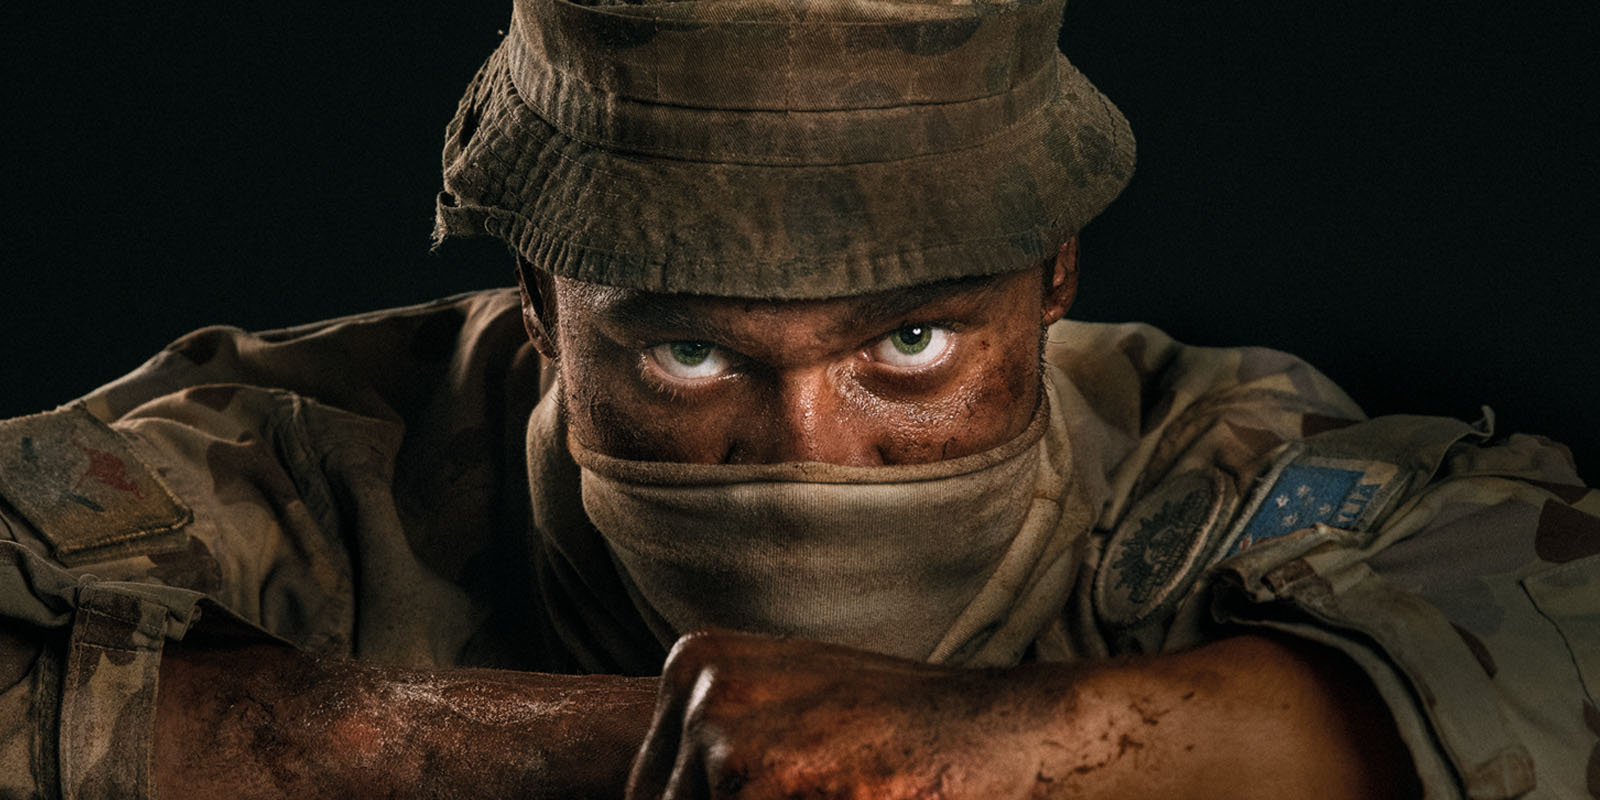 Headshot of Australian soldier in uniform, dirty and sweaty, with mouth covered and intense green eyes